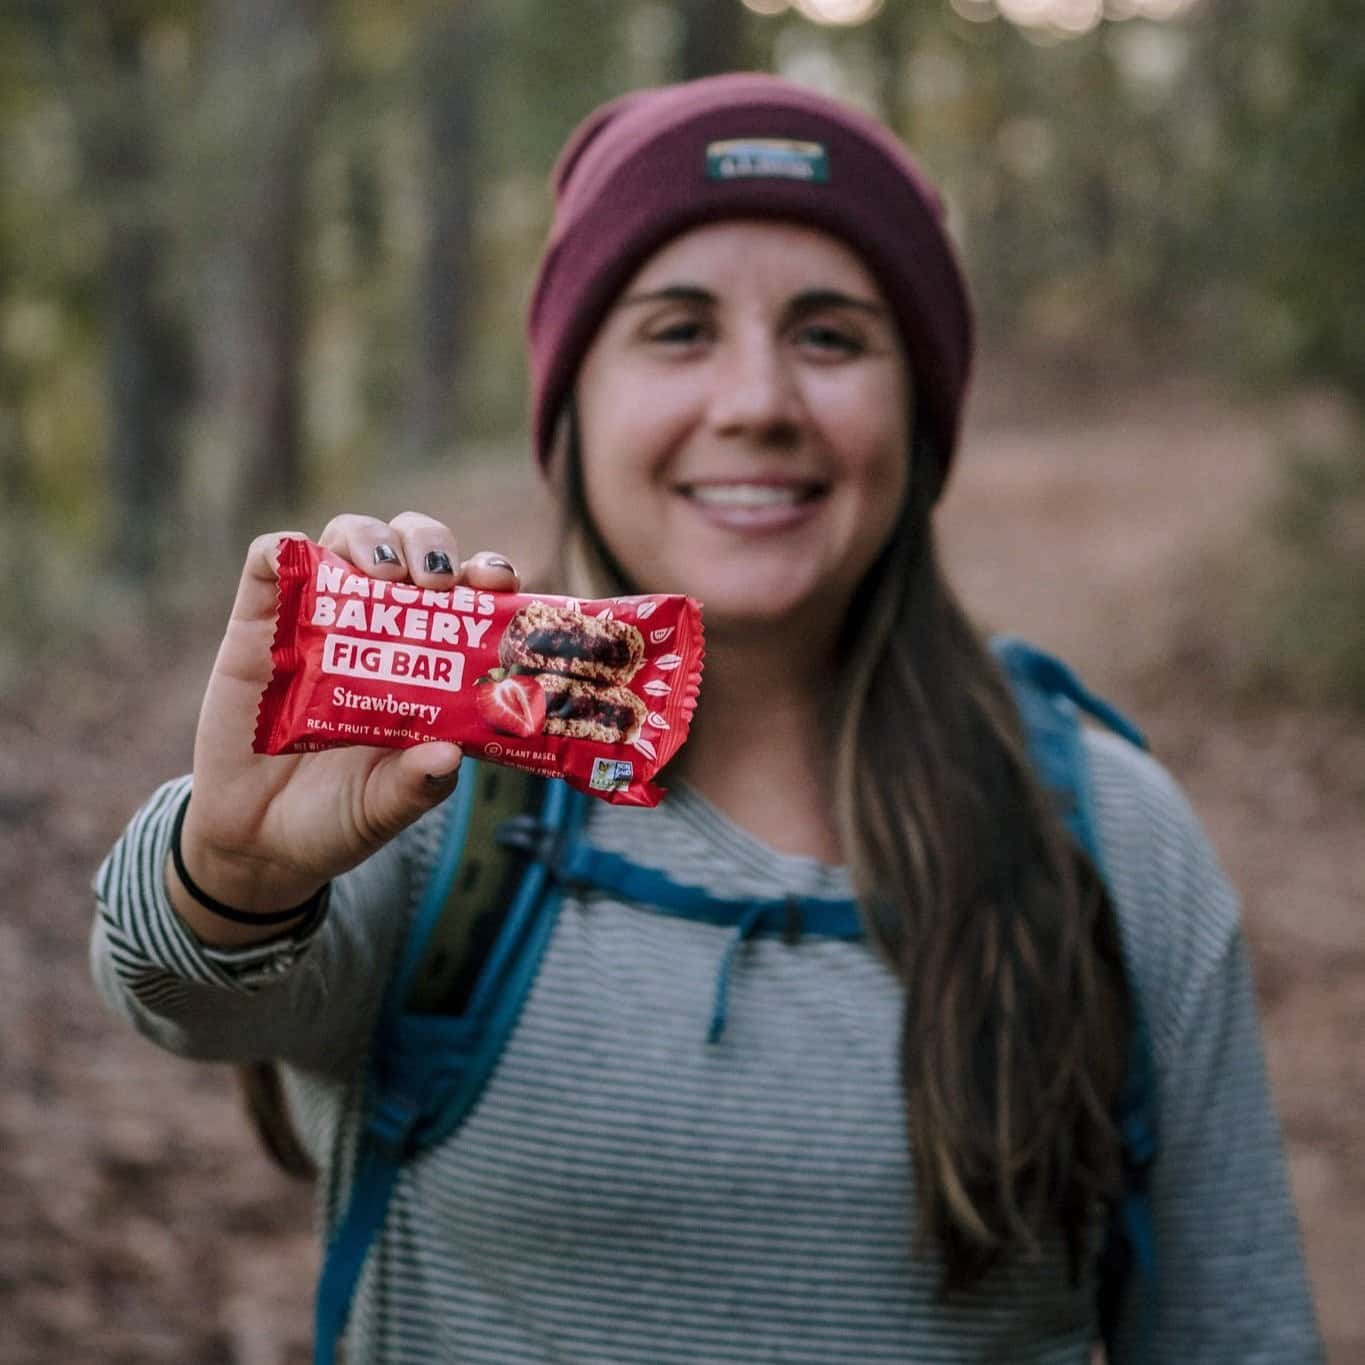 These tasty fig bars from Nature's Bakery are one of my favorite easy snacks for hiking and adventures. 